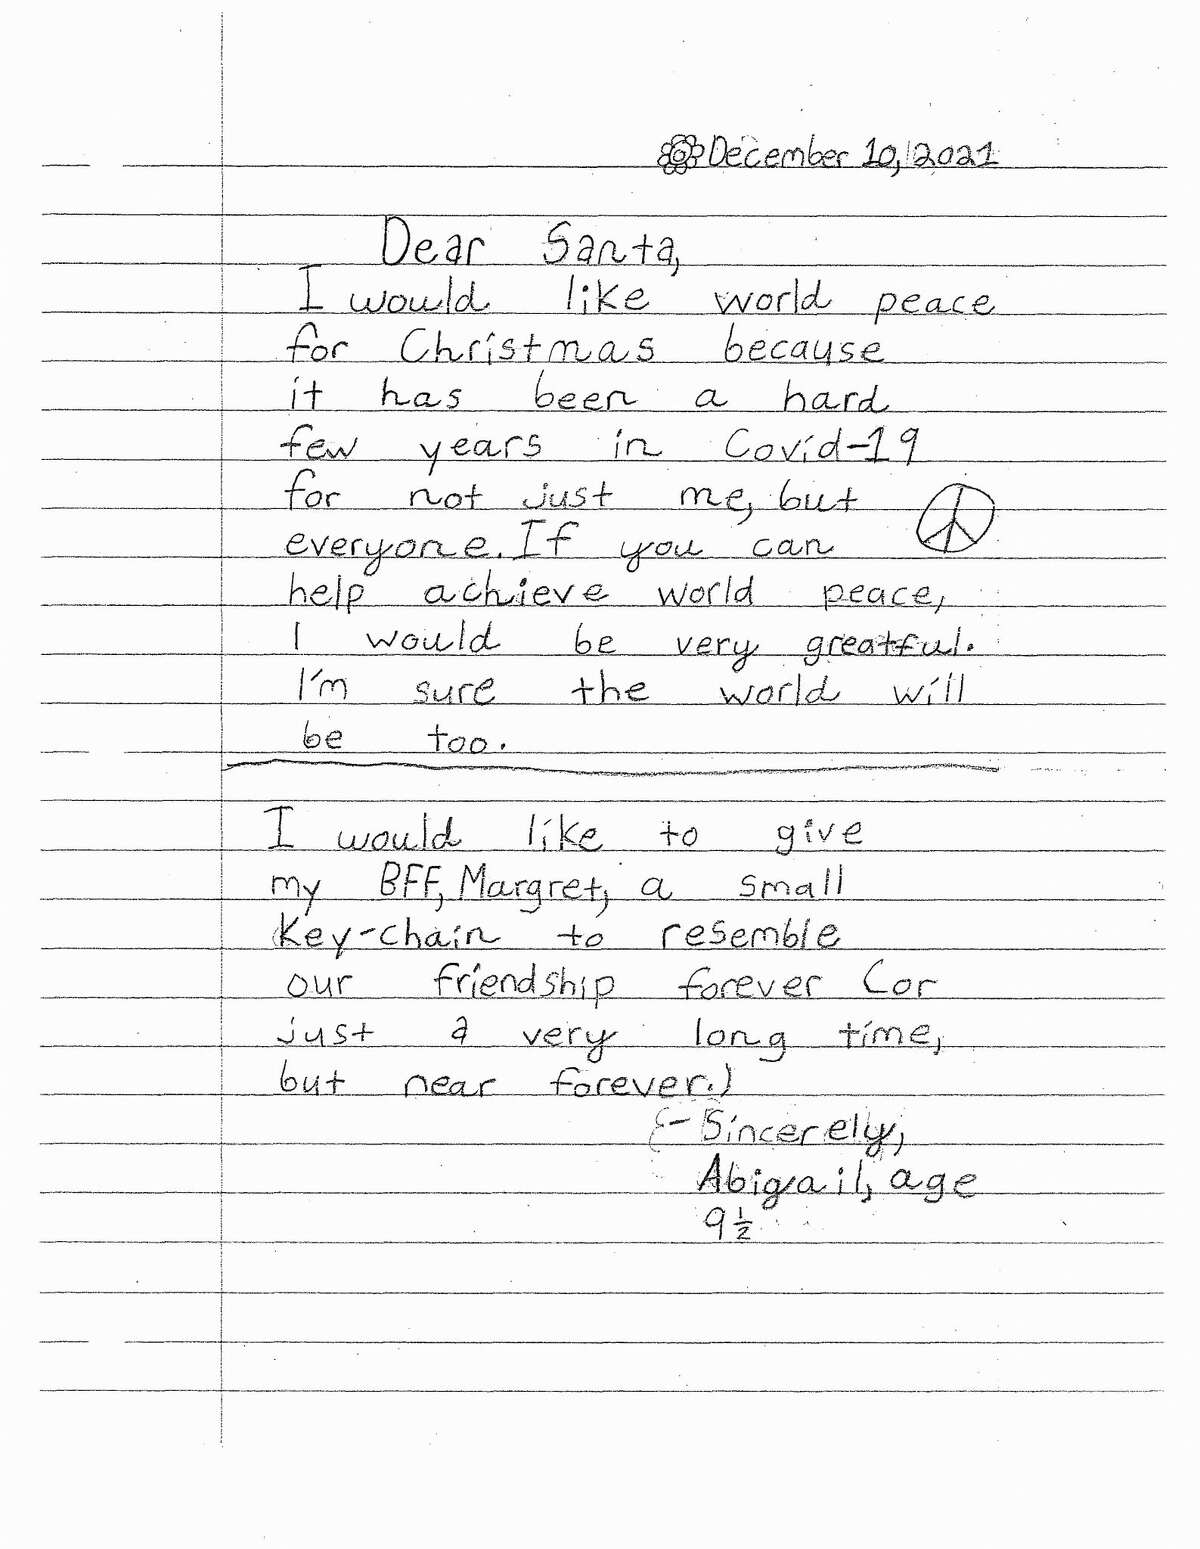 Students from Poe Elementary sat down and wrote letters to Santa. Their joy, innocence, and wisdom is inspiring.